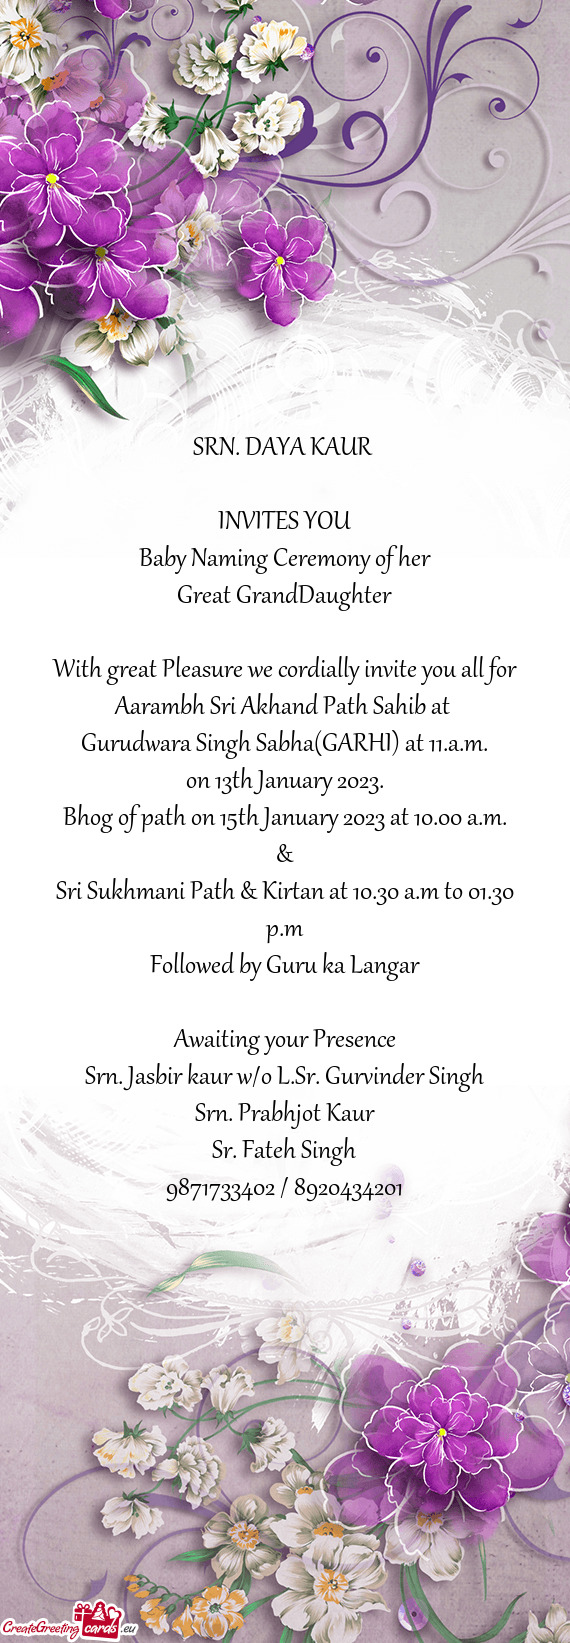 Baby Naming Ceremony of her